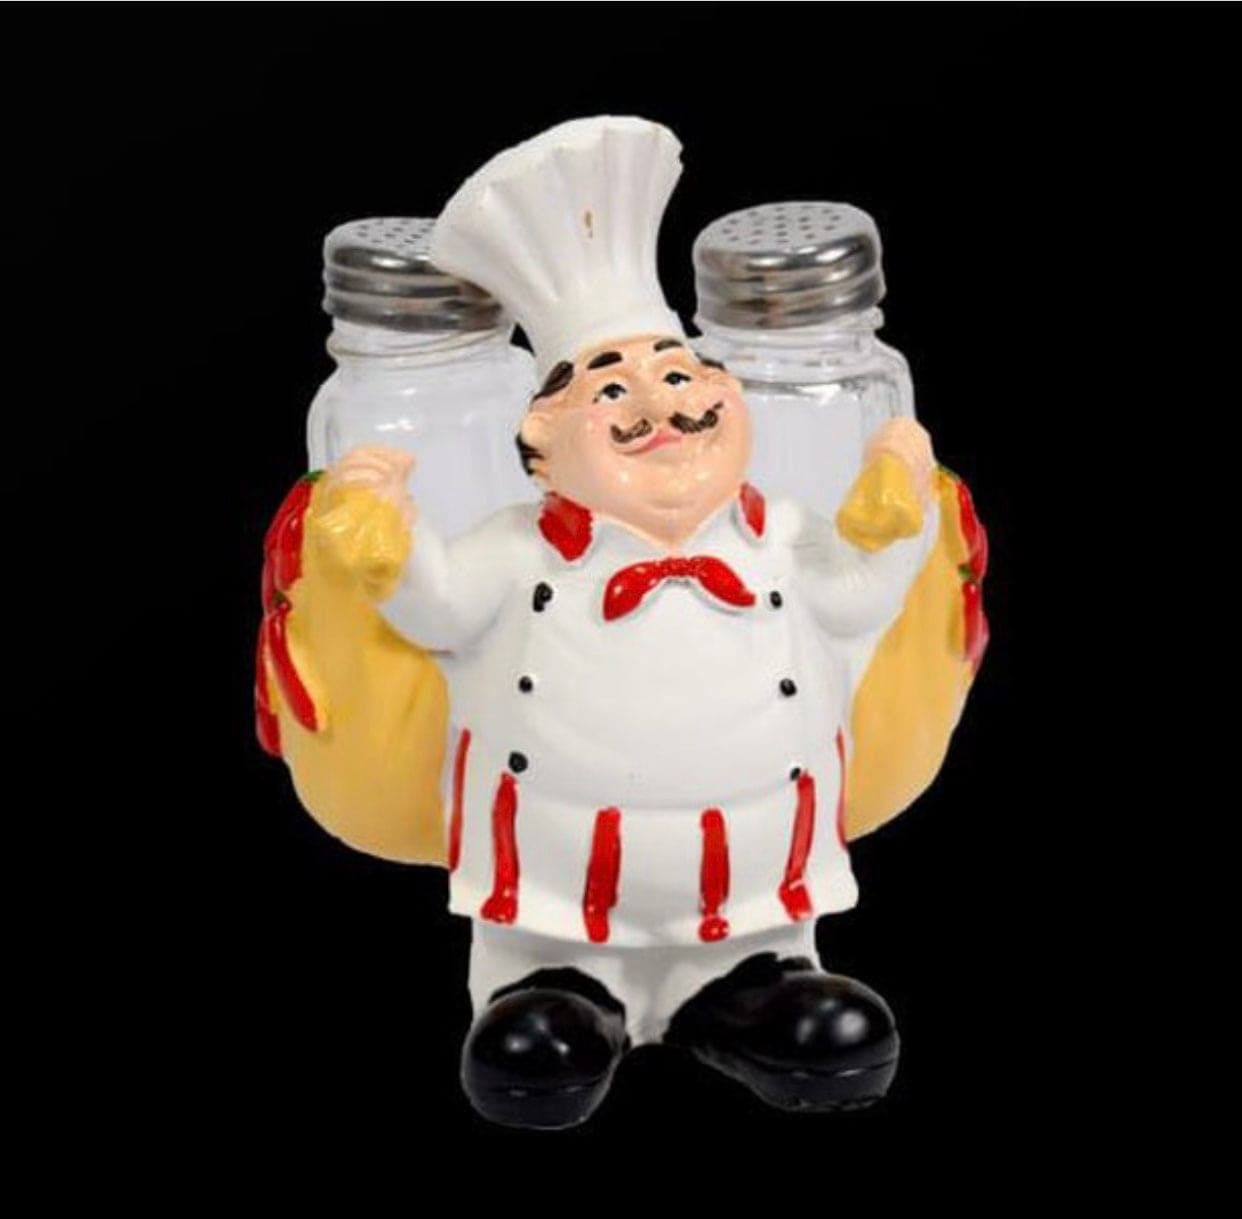 Cute Chef Statue Salt And Pepper Bottle Holder, Kitchen Cute Chef Ornament, Miniatures Mentalities Kitchen Decoration Resin Crafts